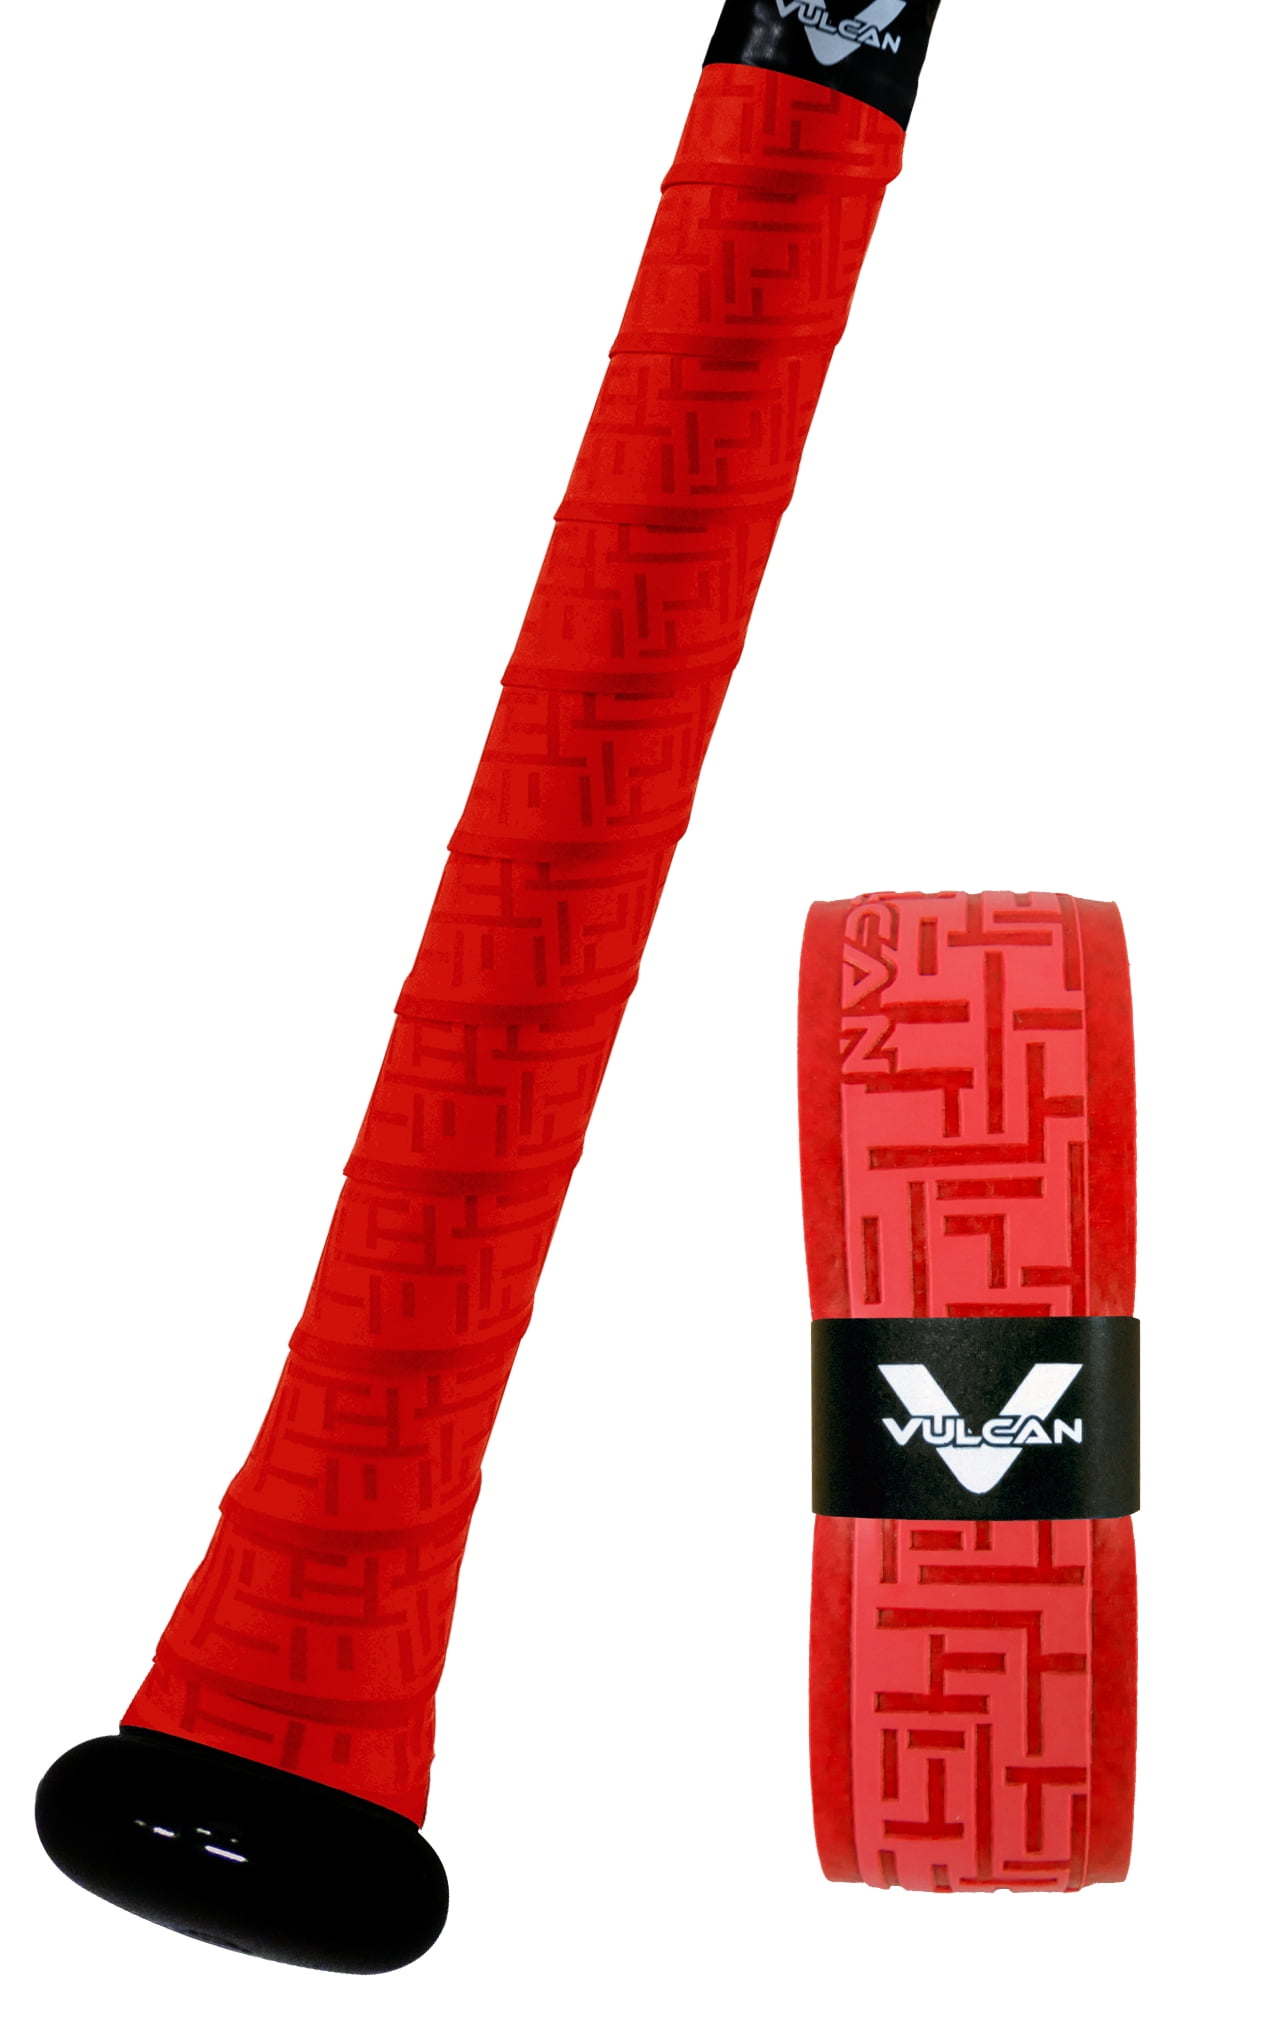 Tanners Vulcan Bat Grip Red Sizzle 0.50mm 